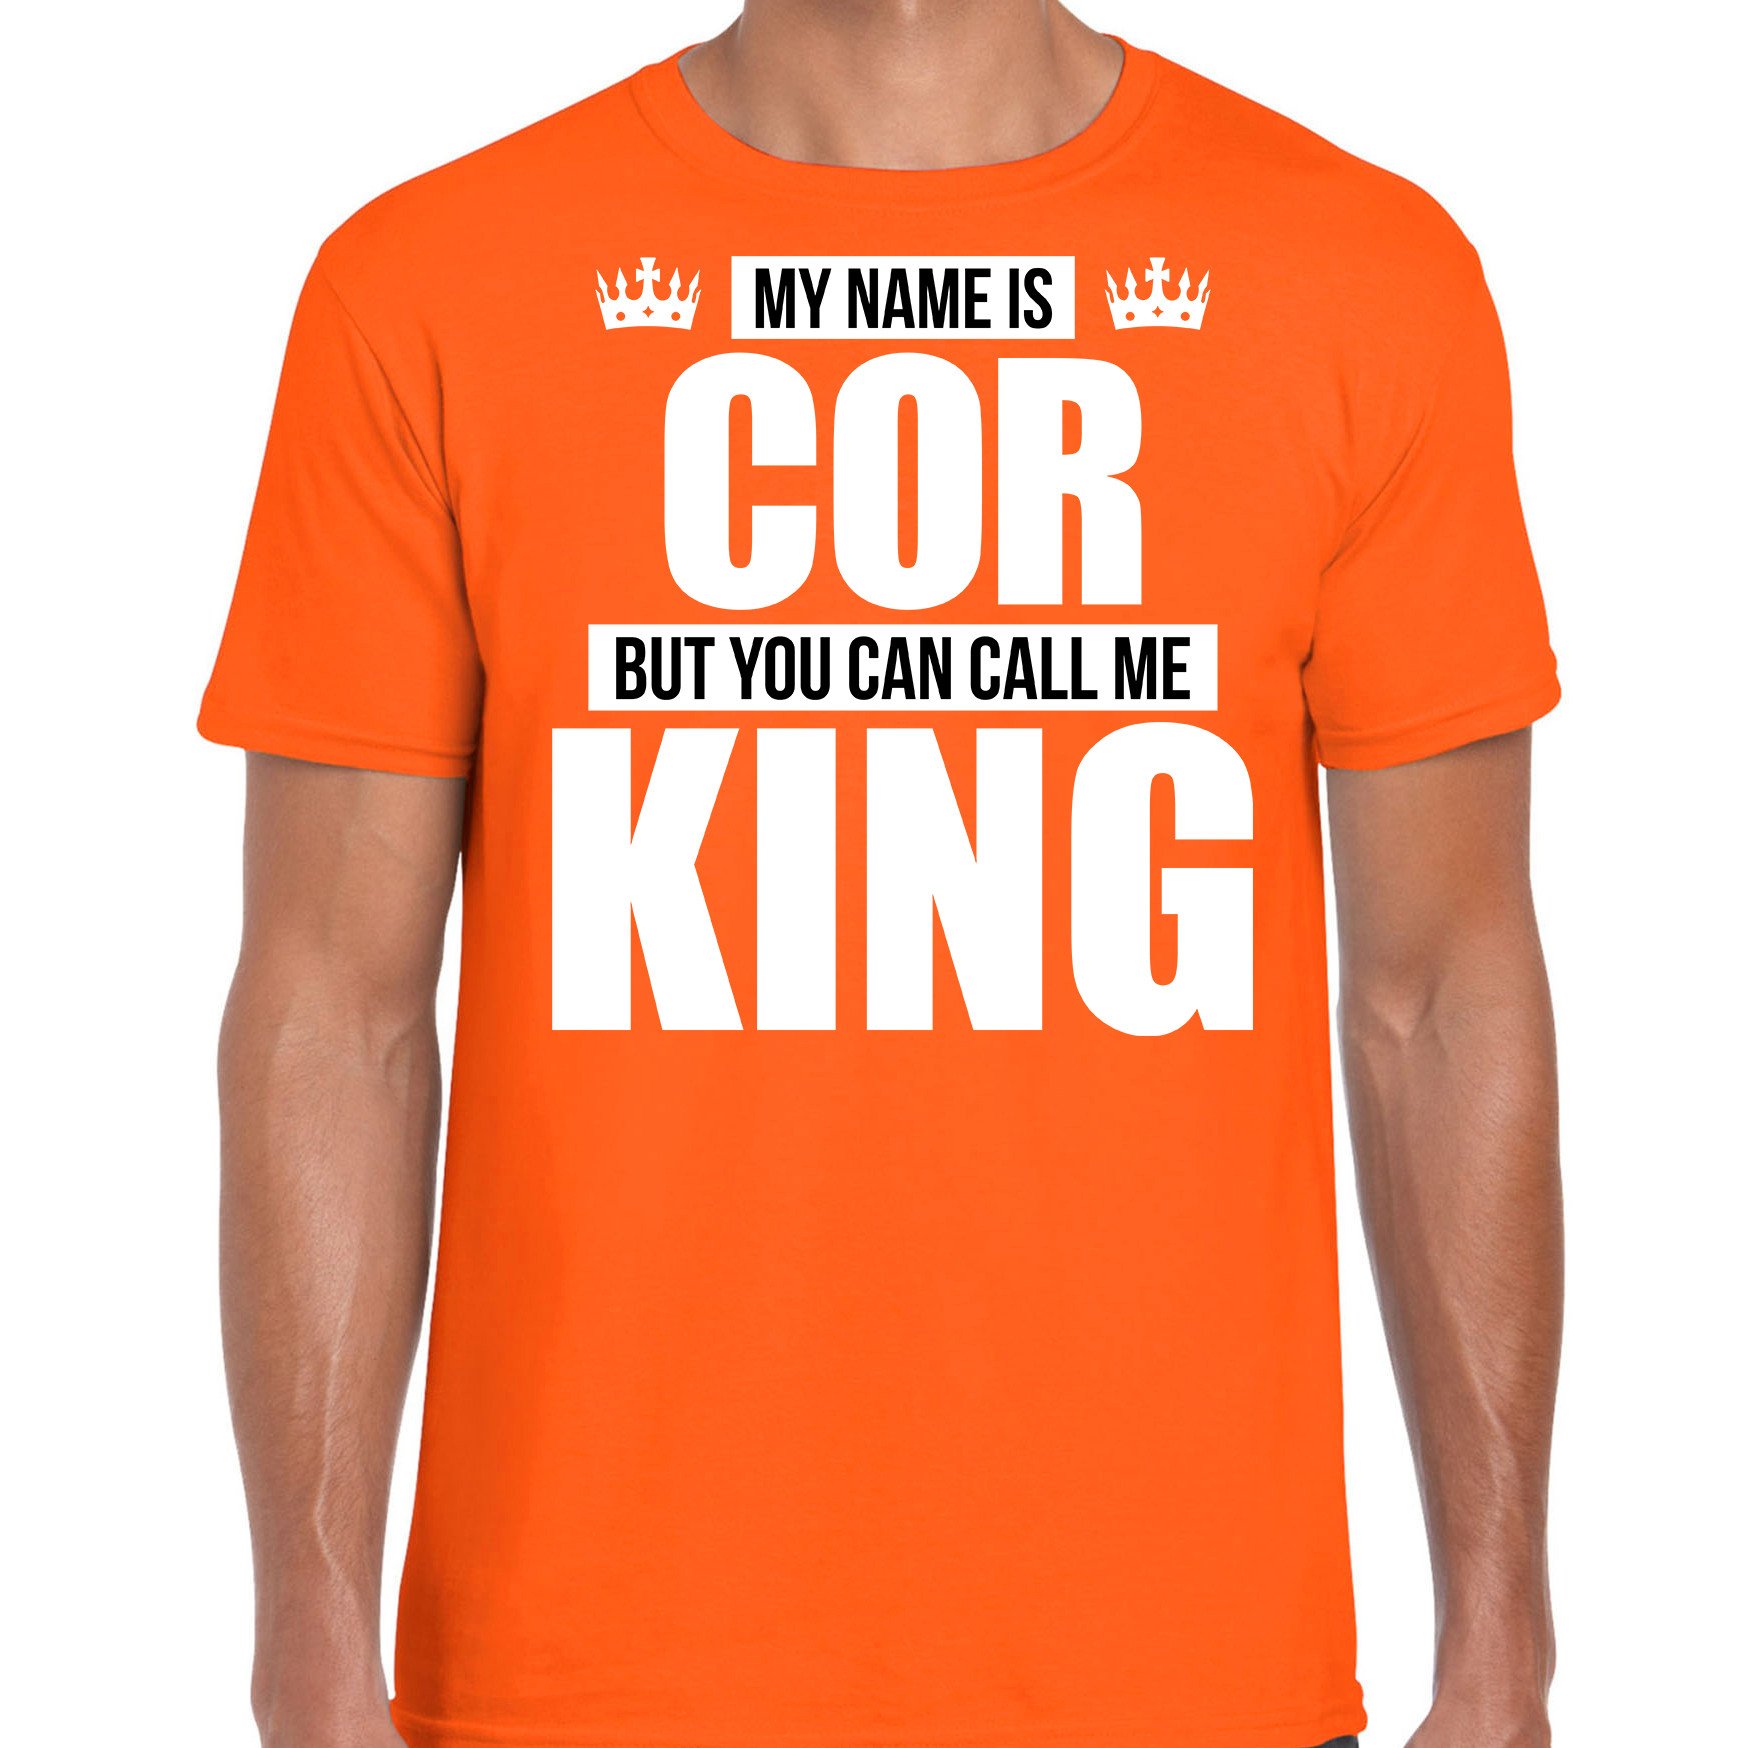 Naam cadeau t-shirt my name is Cor but you can call me King oranje voor heren